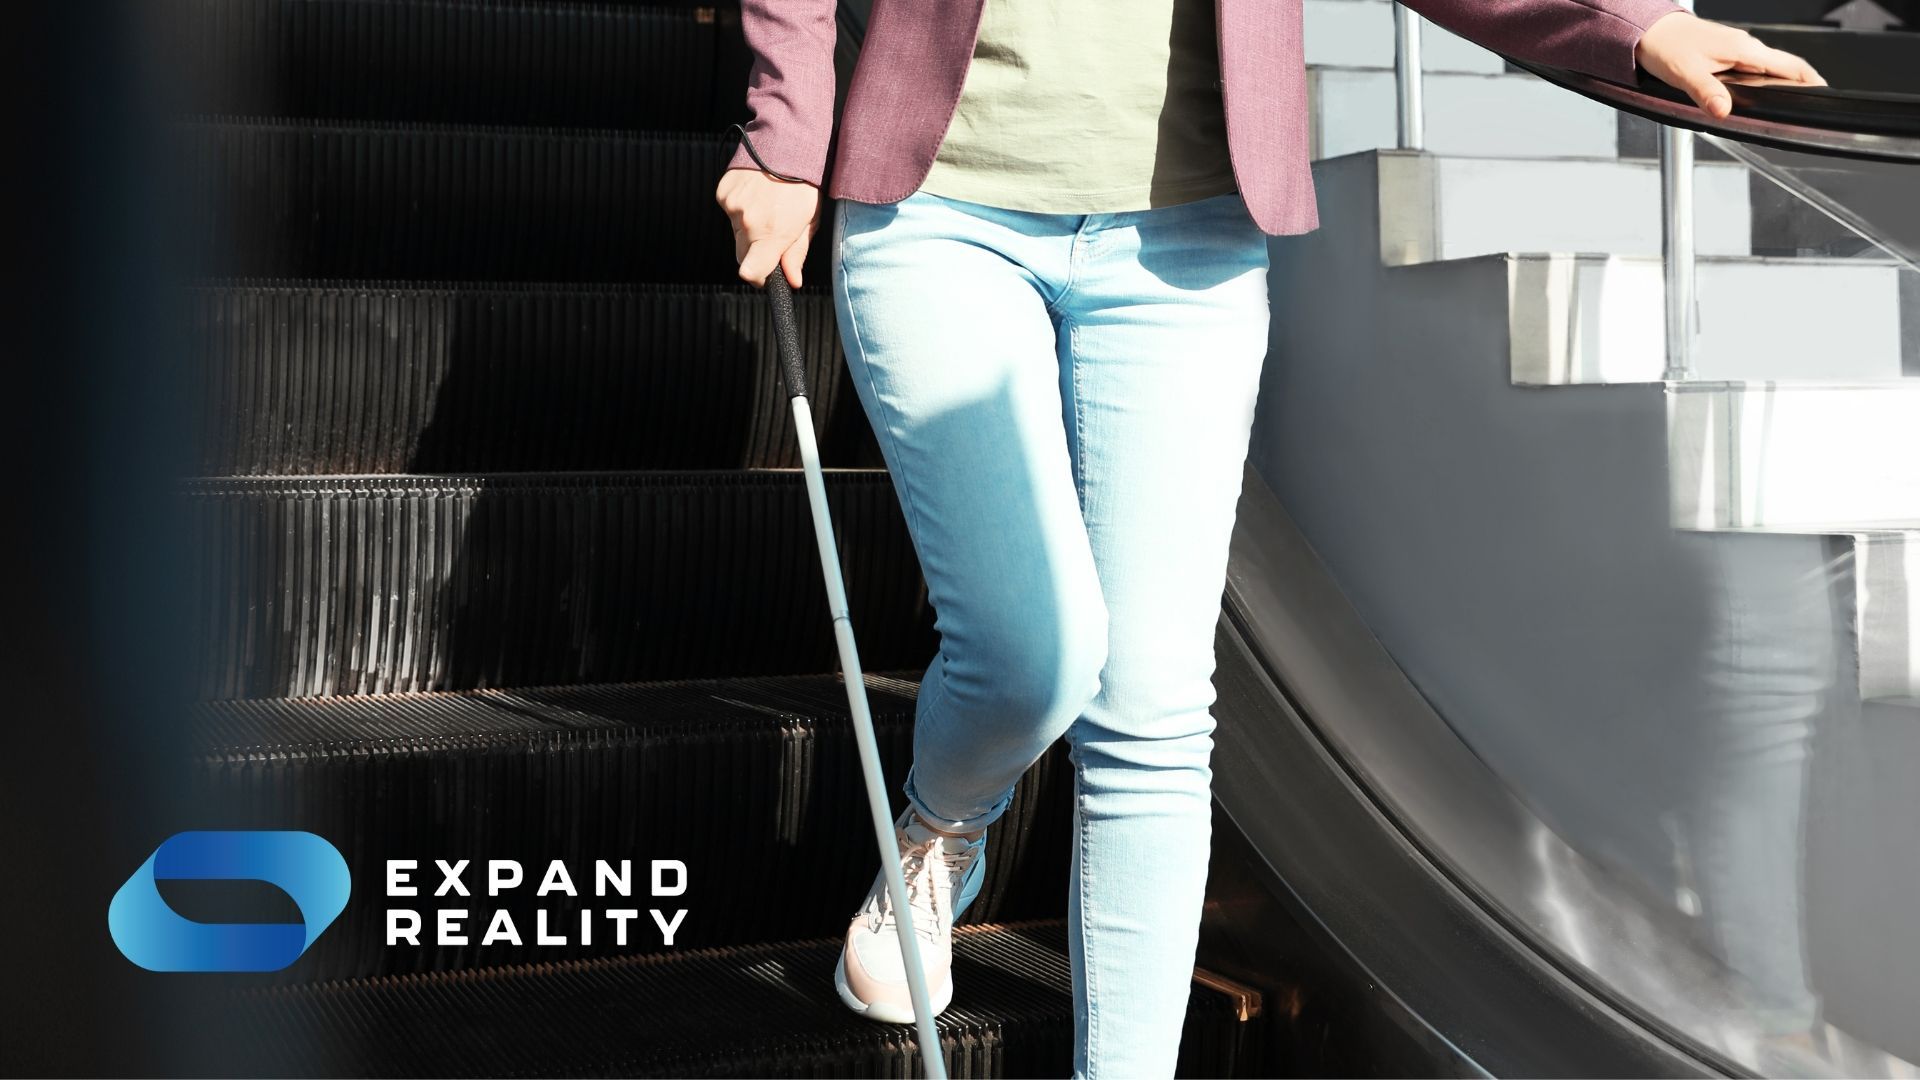 Can extended reality (XR) help people who are blind or visually impaired with their daily lives? Discover more in our 5-minute read on the subject.
